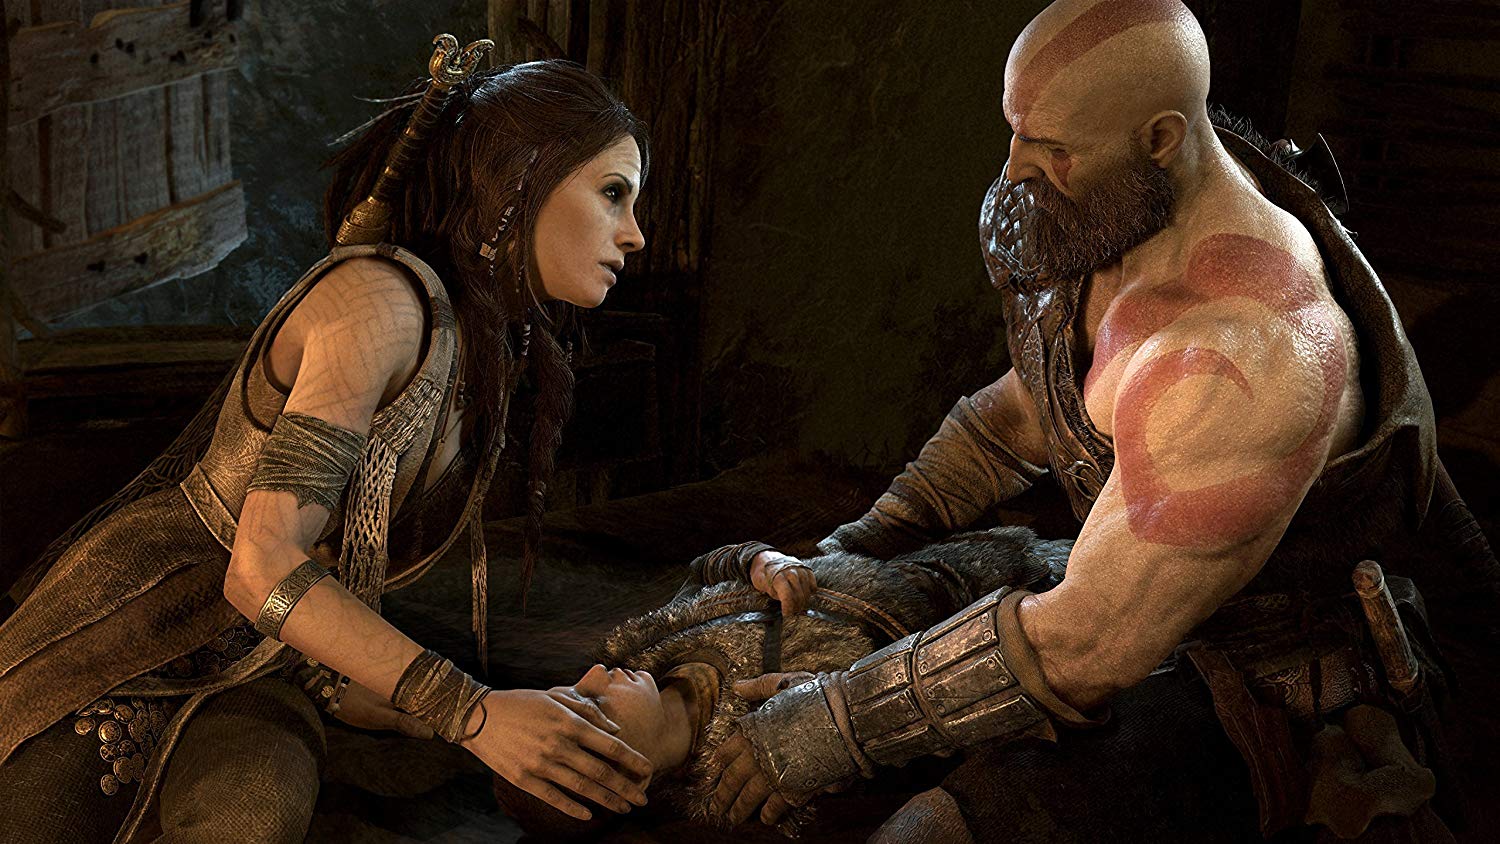 God of War Sequel Story and Character Rumors